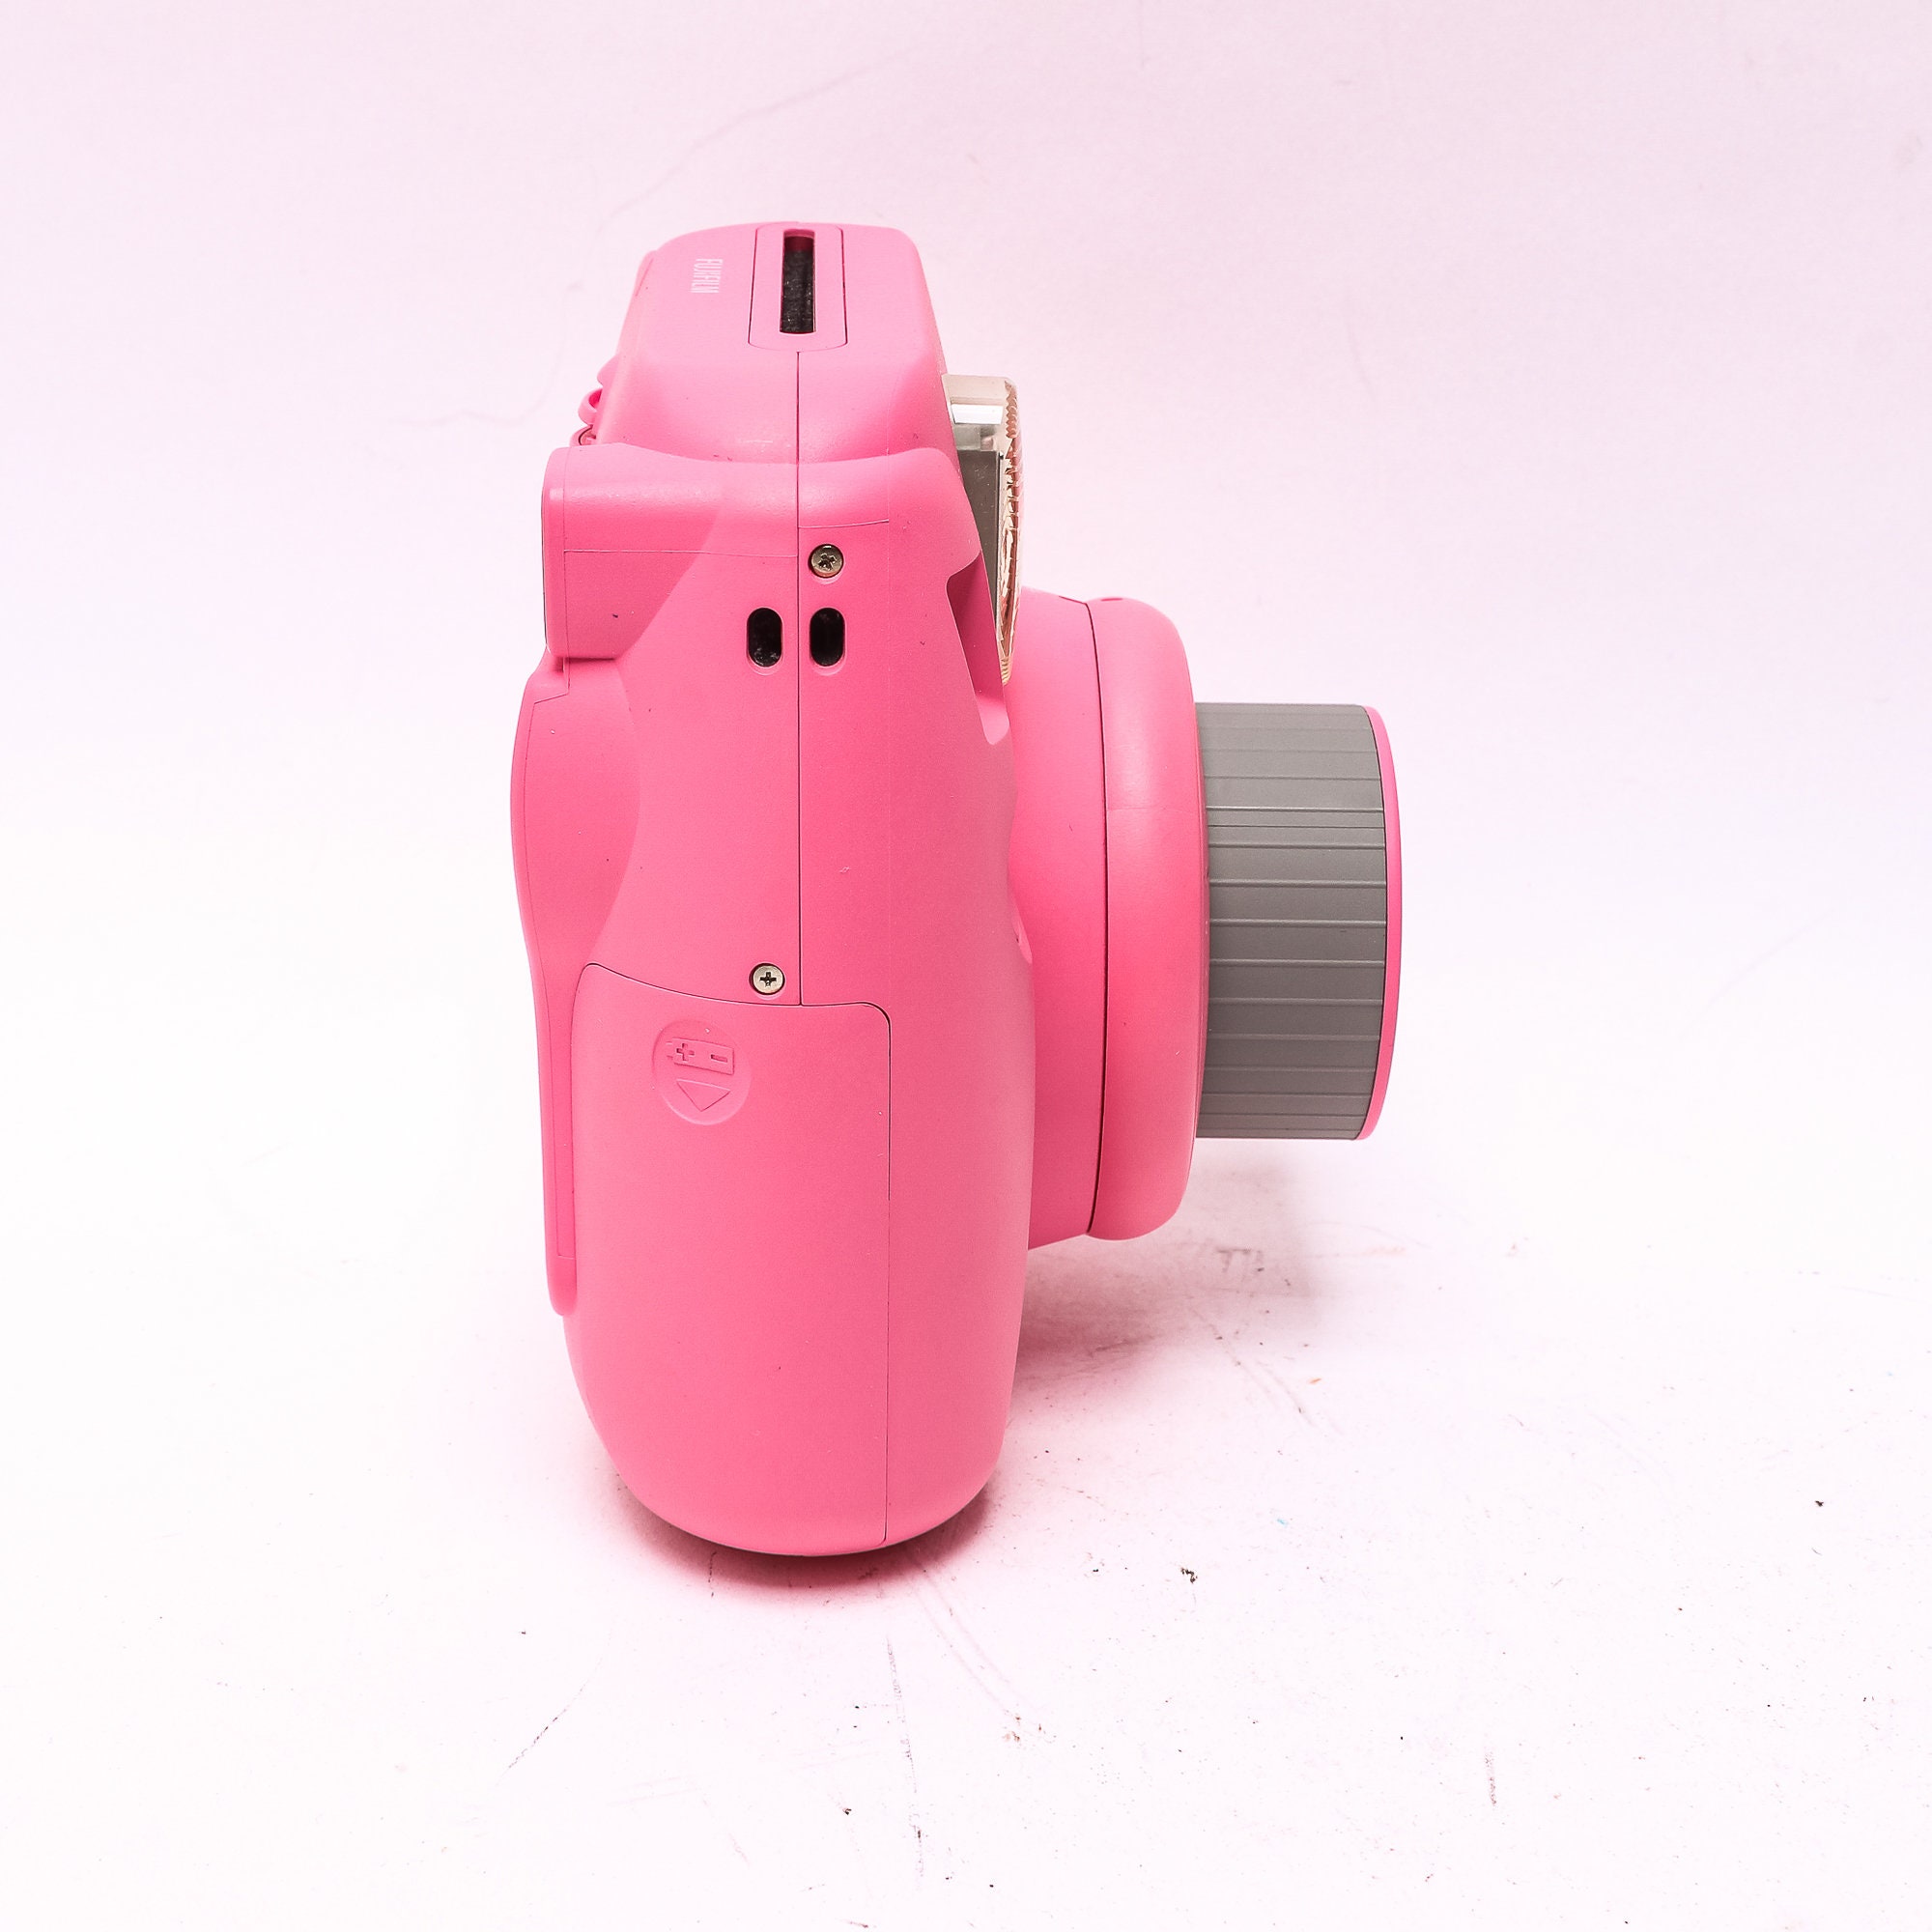 Fujifilm Instax Mini 9 Pink Instant Camera With Matching Pink Carrying Case  & Strap - Etsy